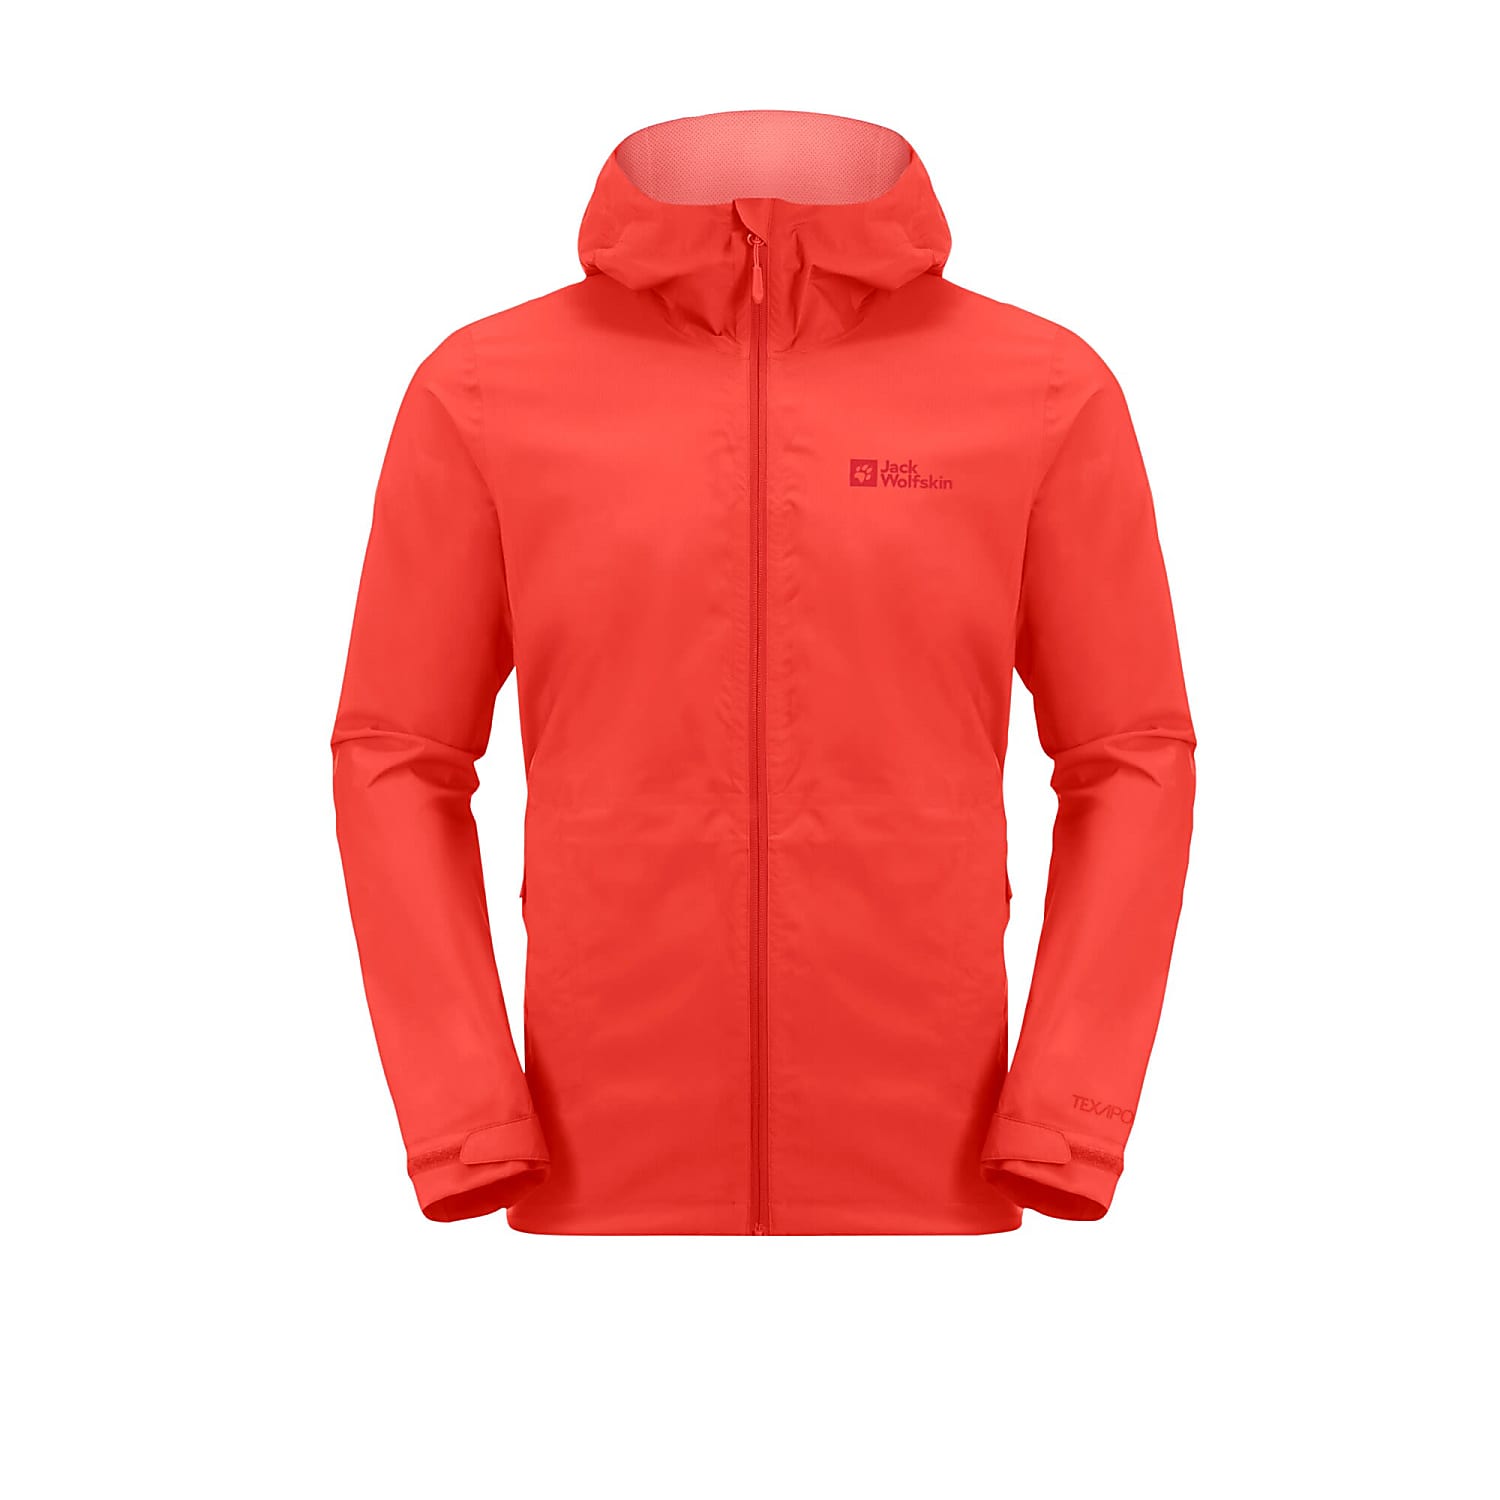 Jack Wolfskin shipping - JKT, Red cheap ELSBERG and Strong M 2.5L Fast